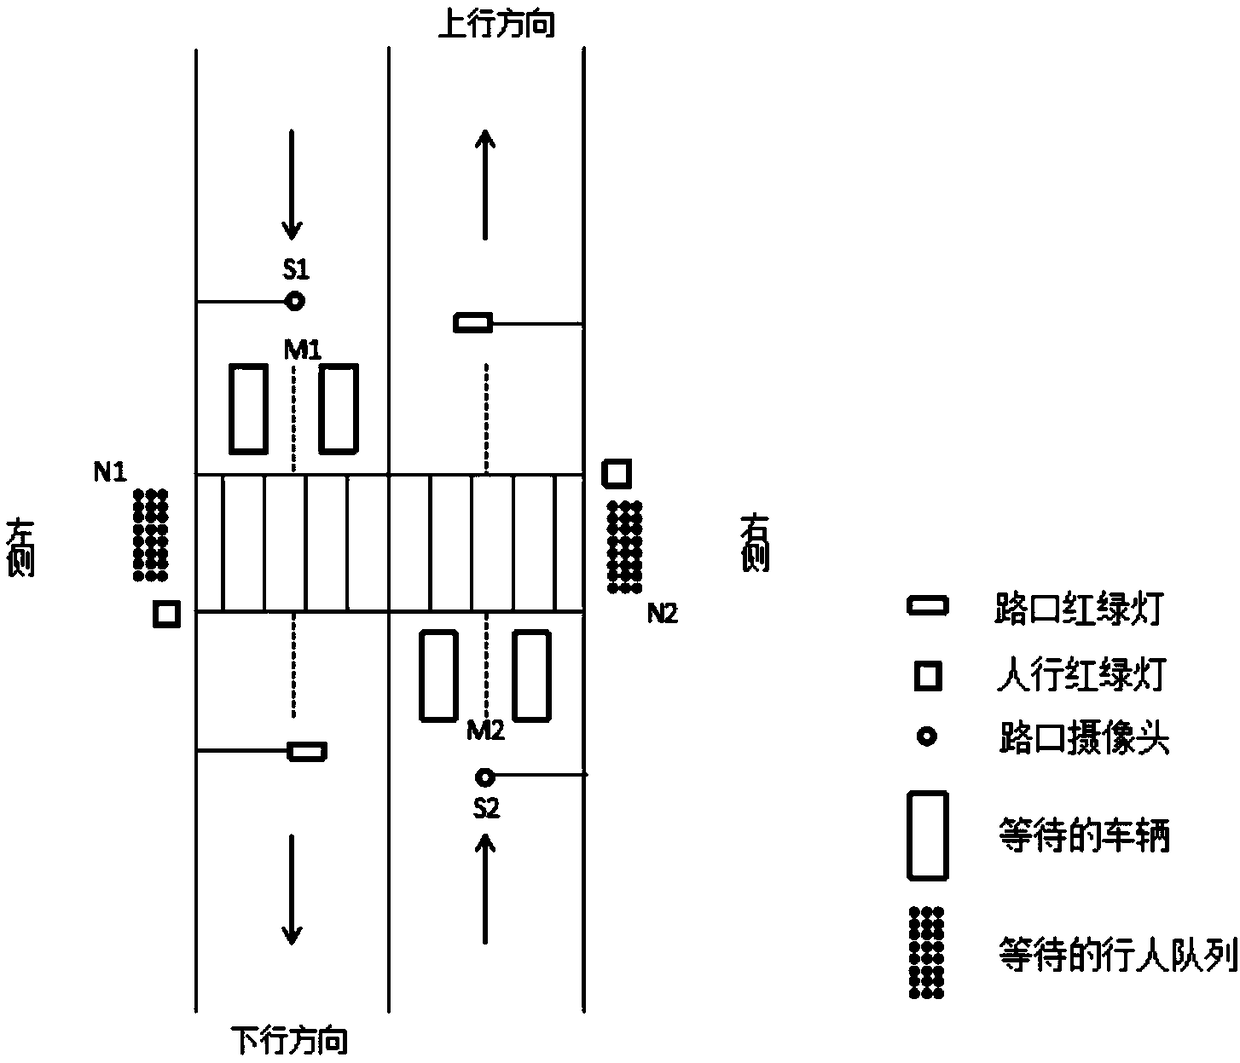 Traffic light time control method for two-way multi-lane zebra crossing intersection